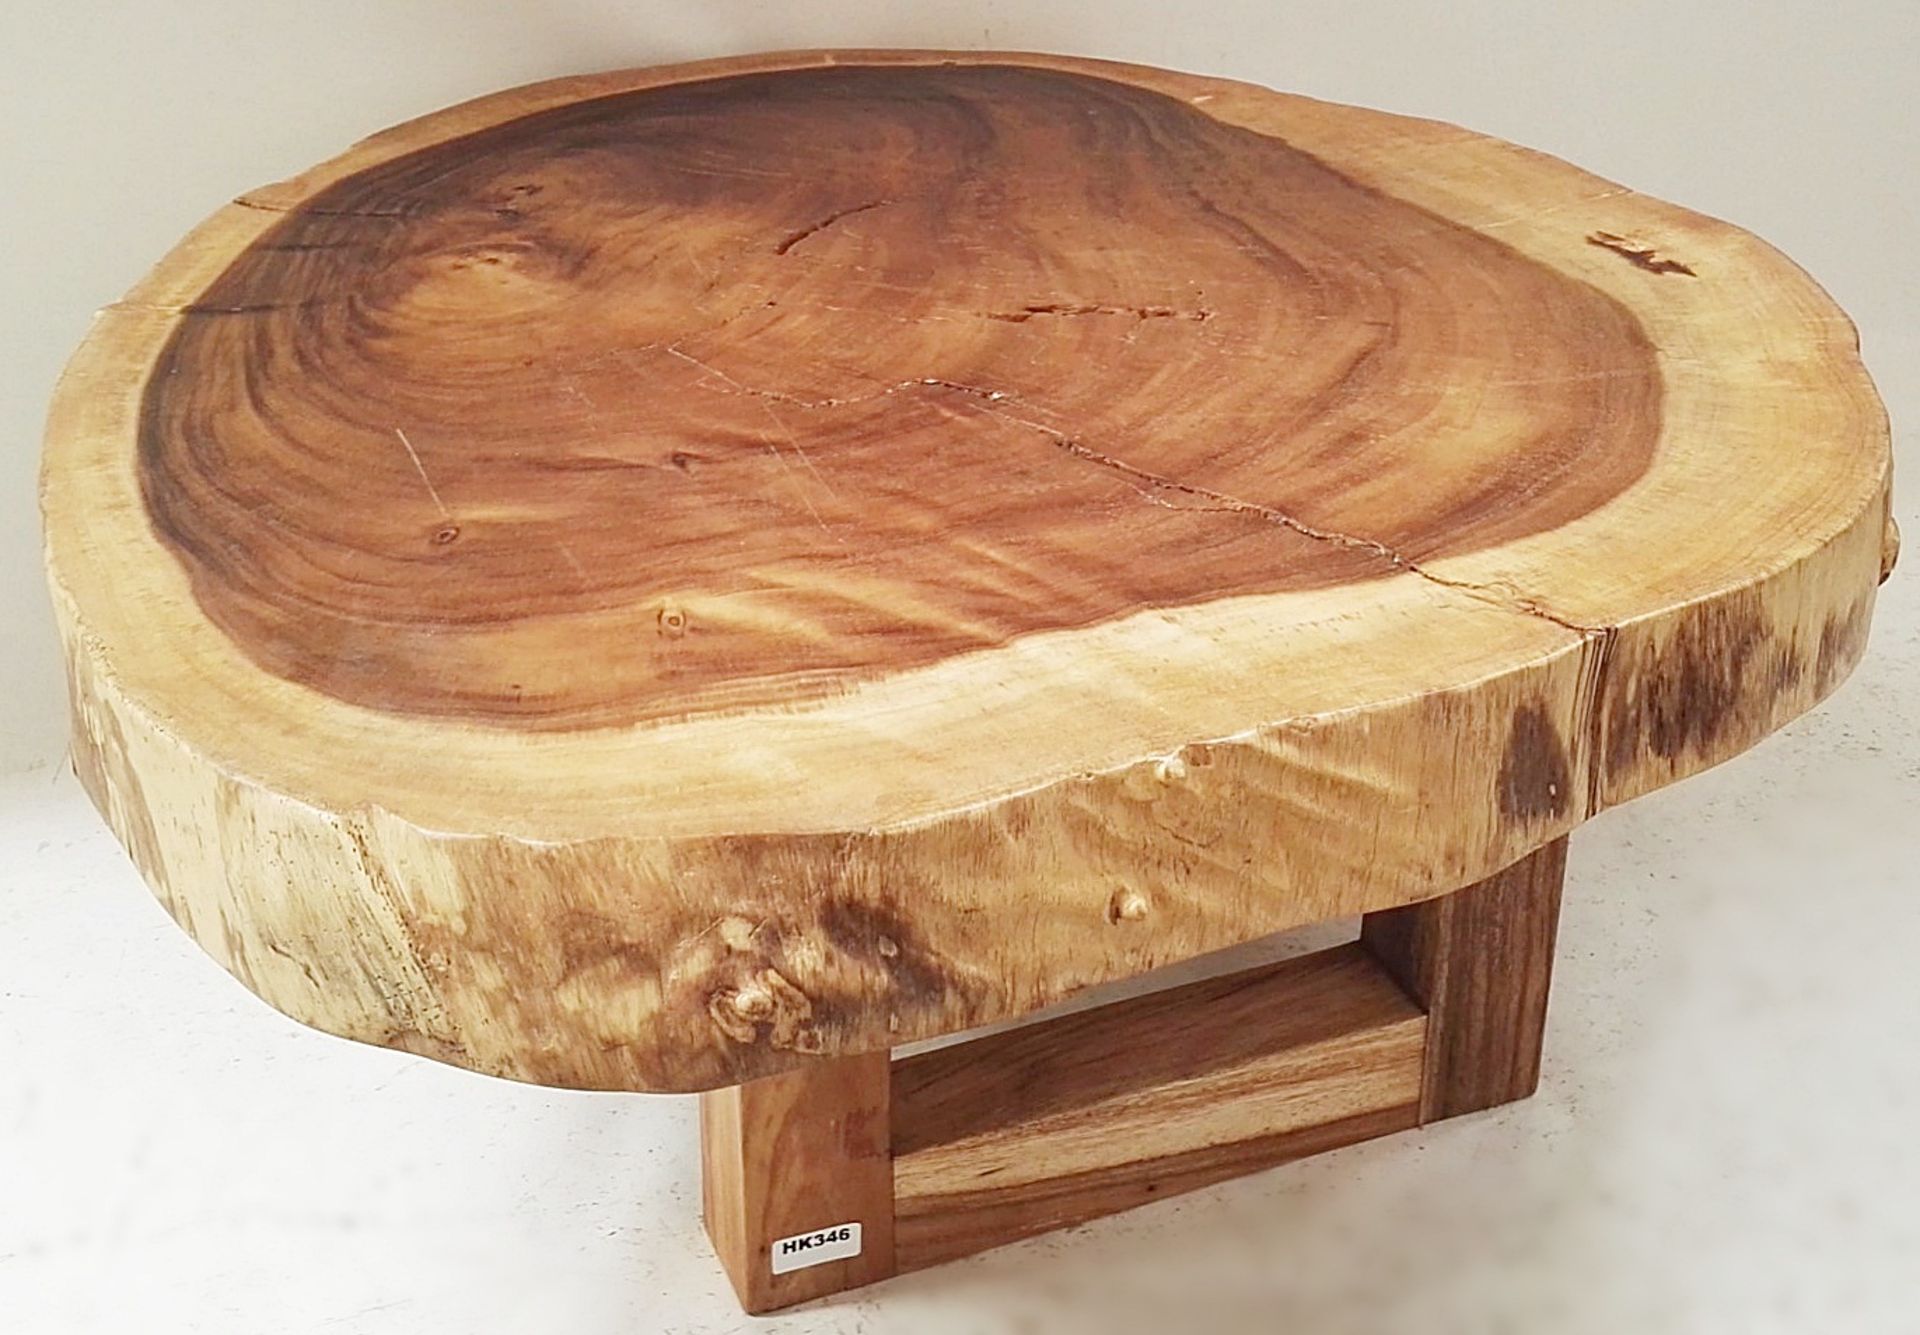 1 x Unique Reclaimed Solid Tree Trunk Coffee Table With Square Base - Image 4 of 5